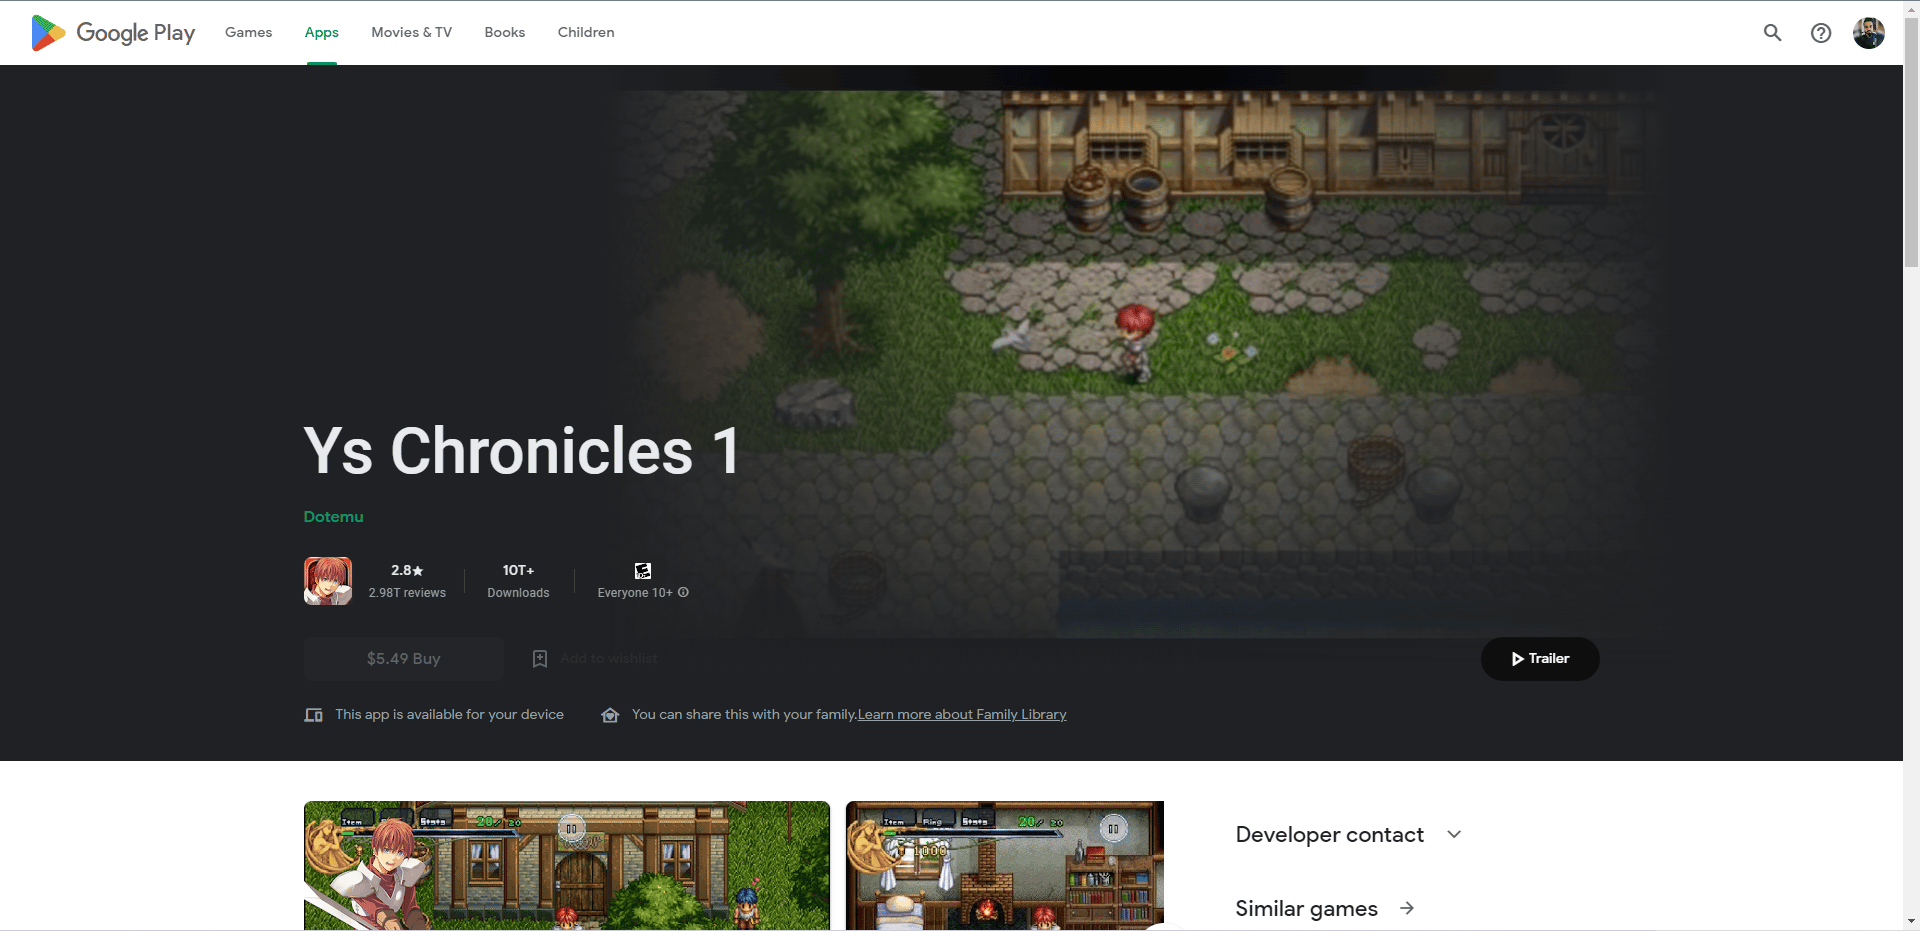 Ys Chronicles 1 Play Store webpage